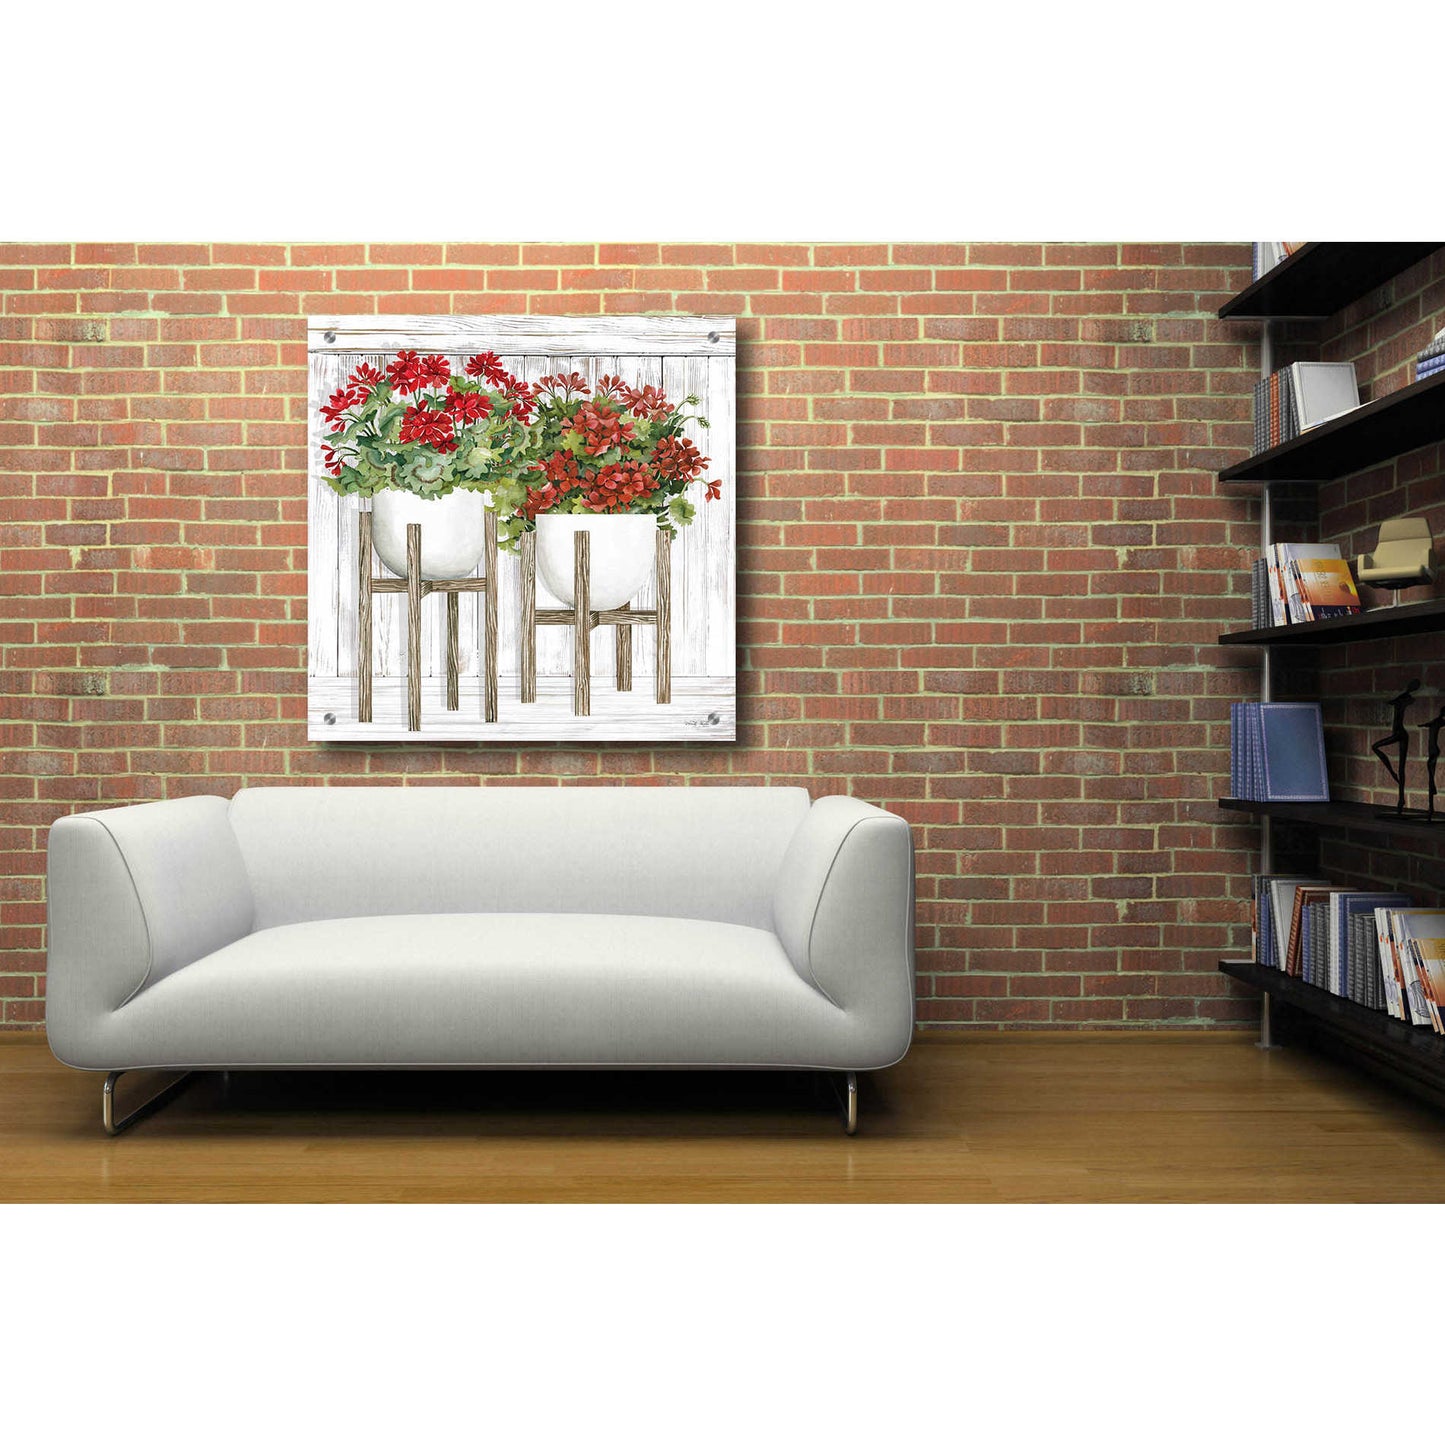 Epic Art 'Red Geraniums' by Cindy Jacobs, Acrylic Glass Wall Art,36x36